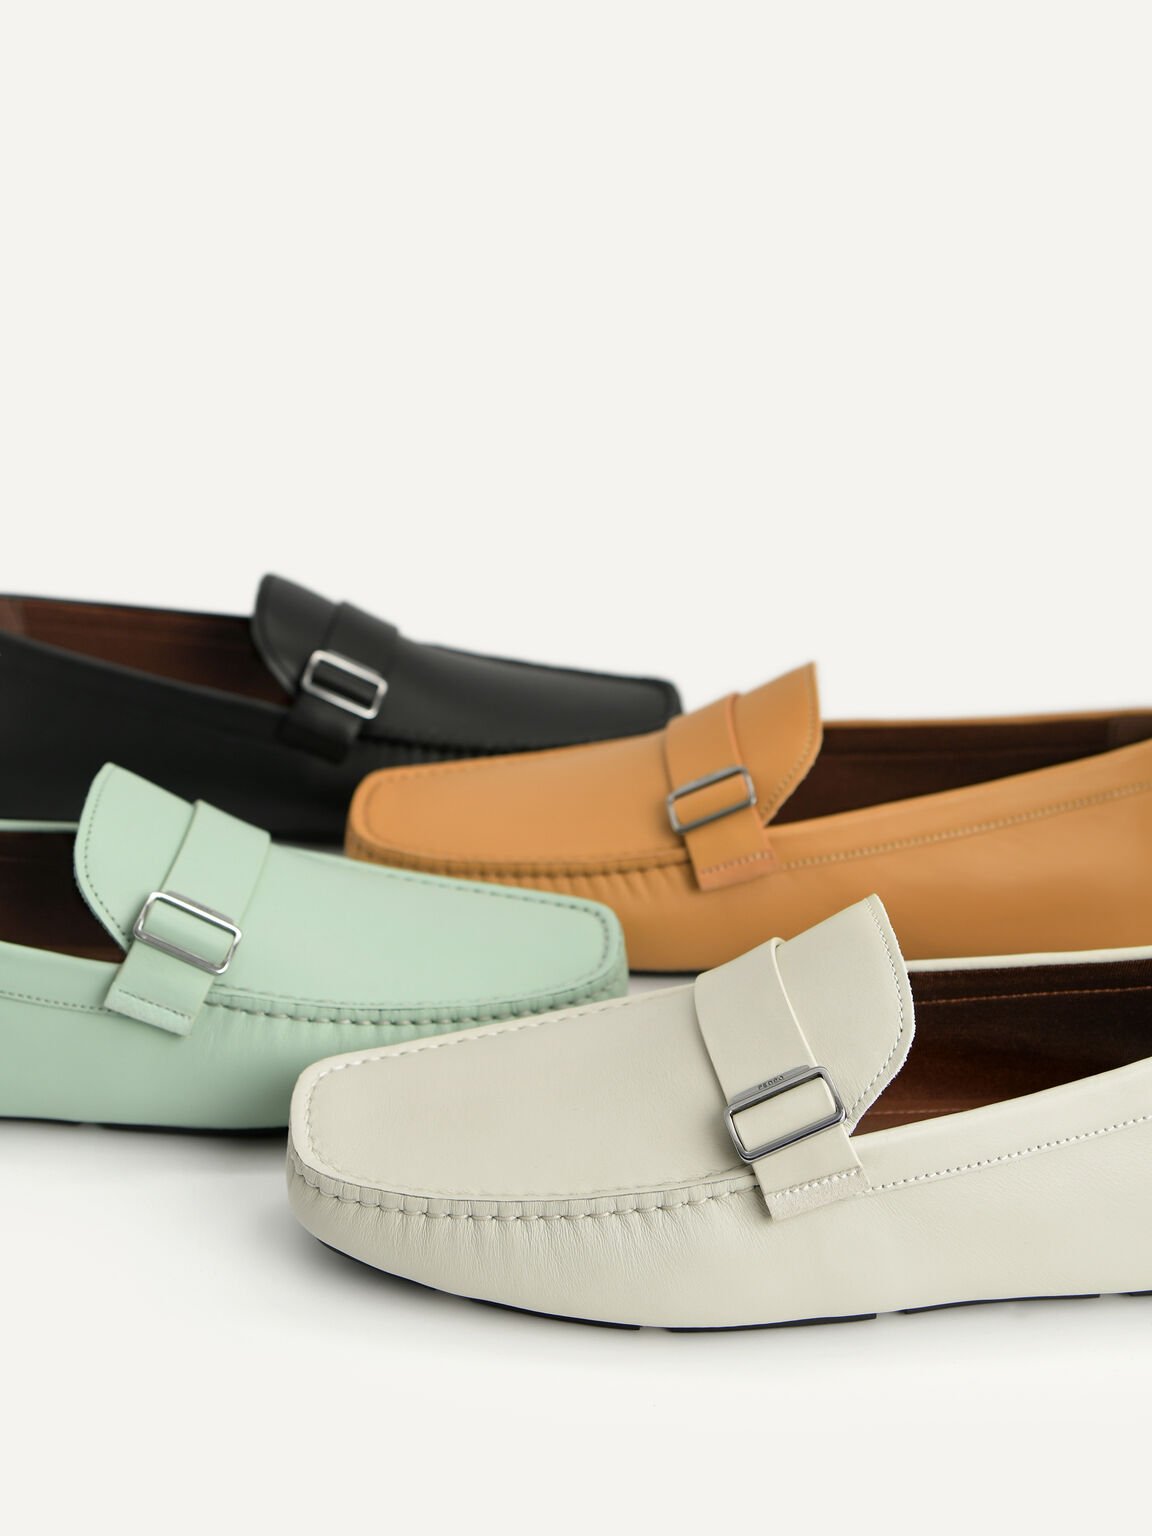 Leather Moccasins with Buckle Detail, Light Green